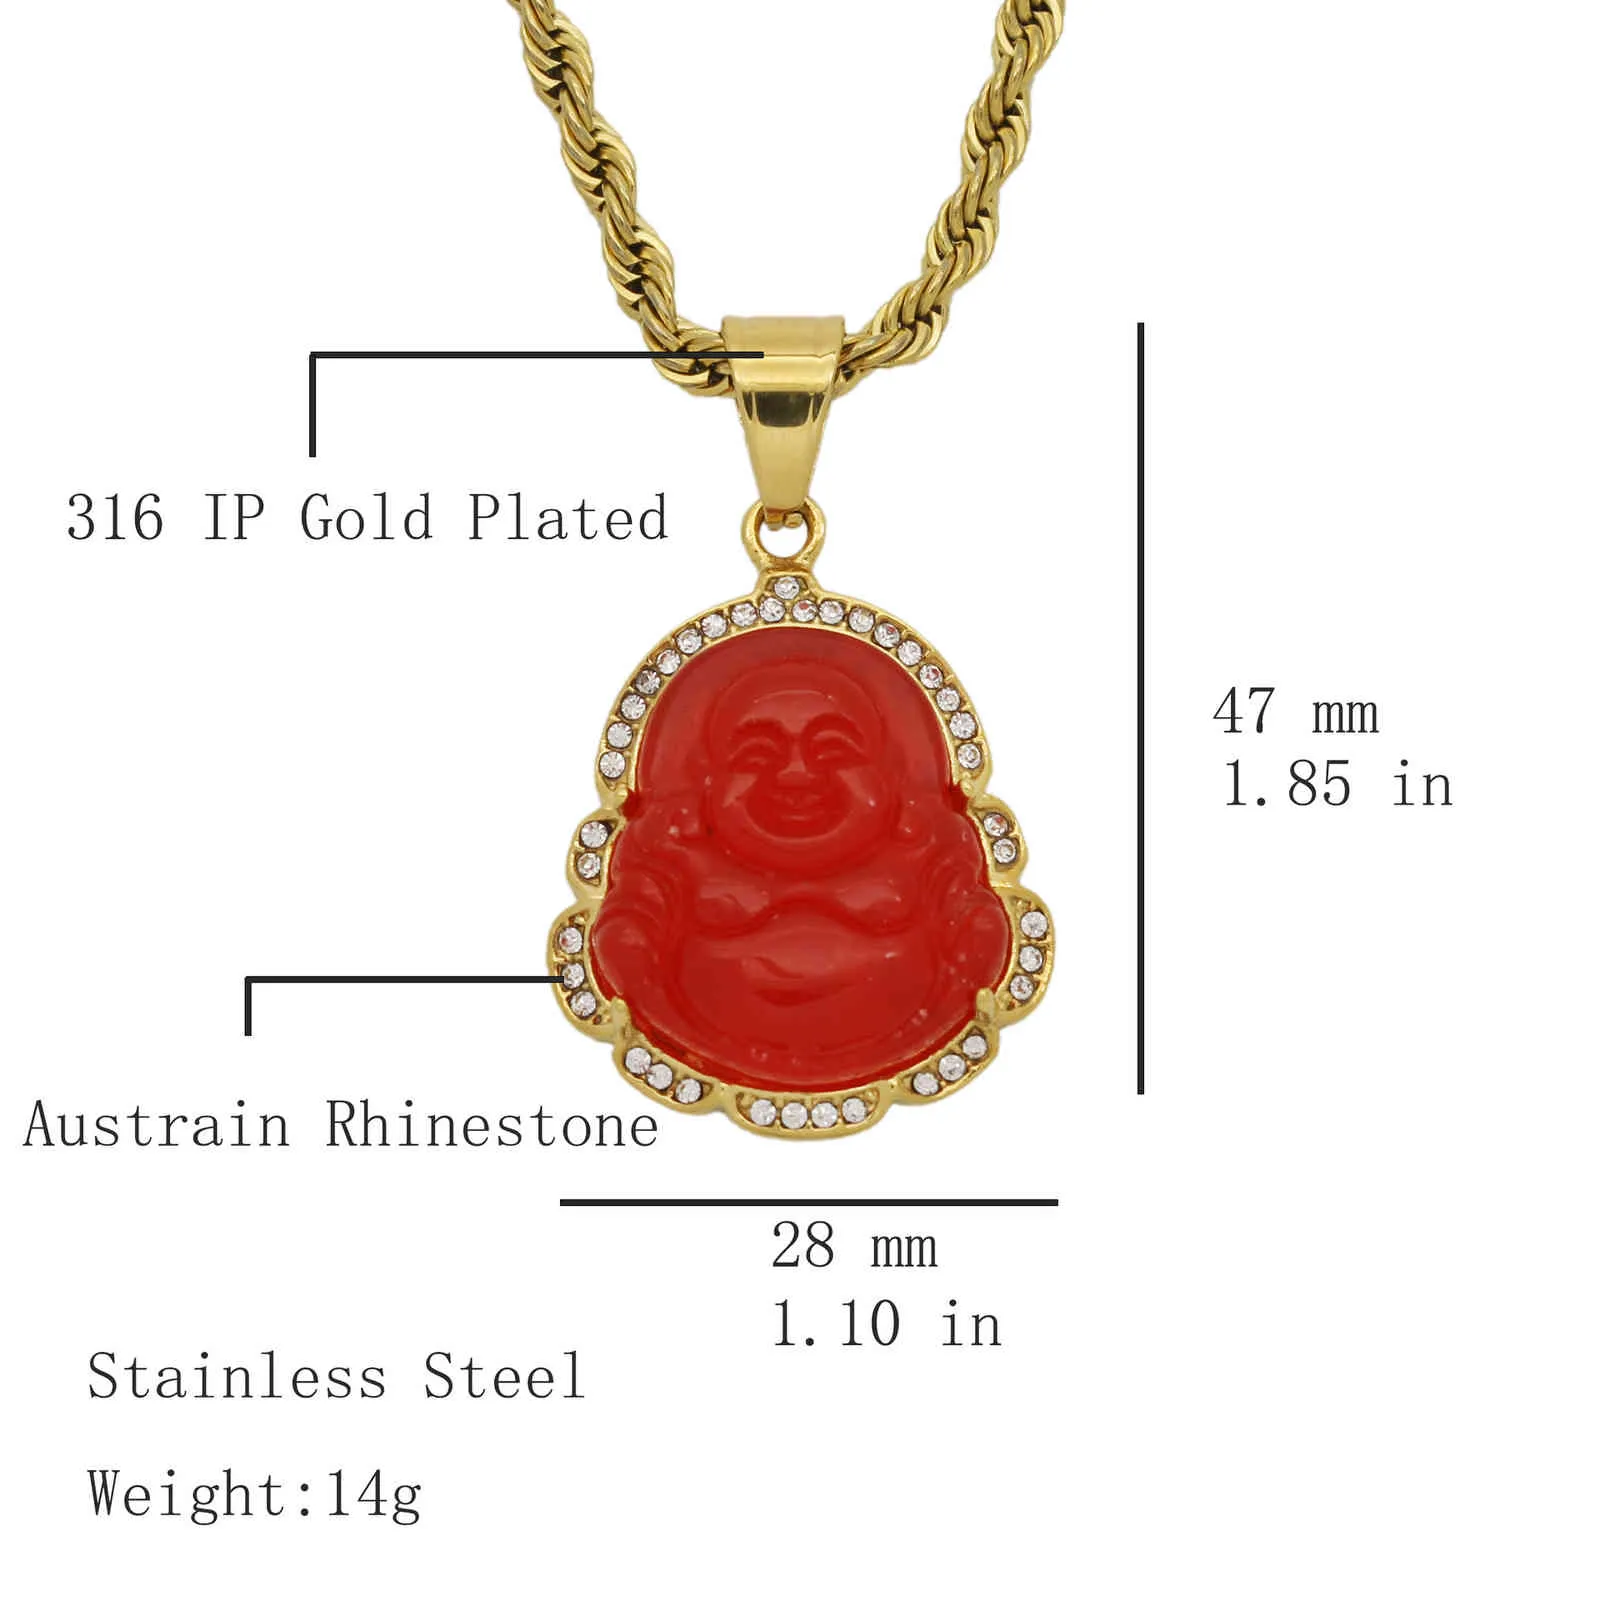 Green Jade Jewelry Laughing Buddha Pendant Chain Necklace For Women Stainless Steel 18k Gold Plated Amulet Accessories Mothers Day Gift